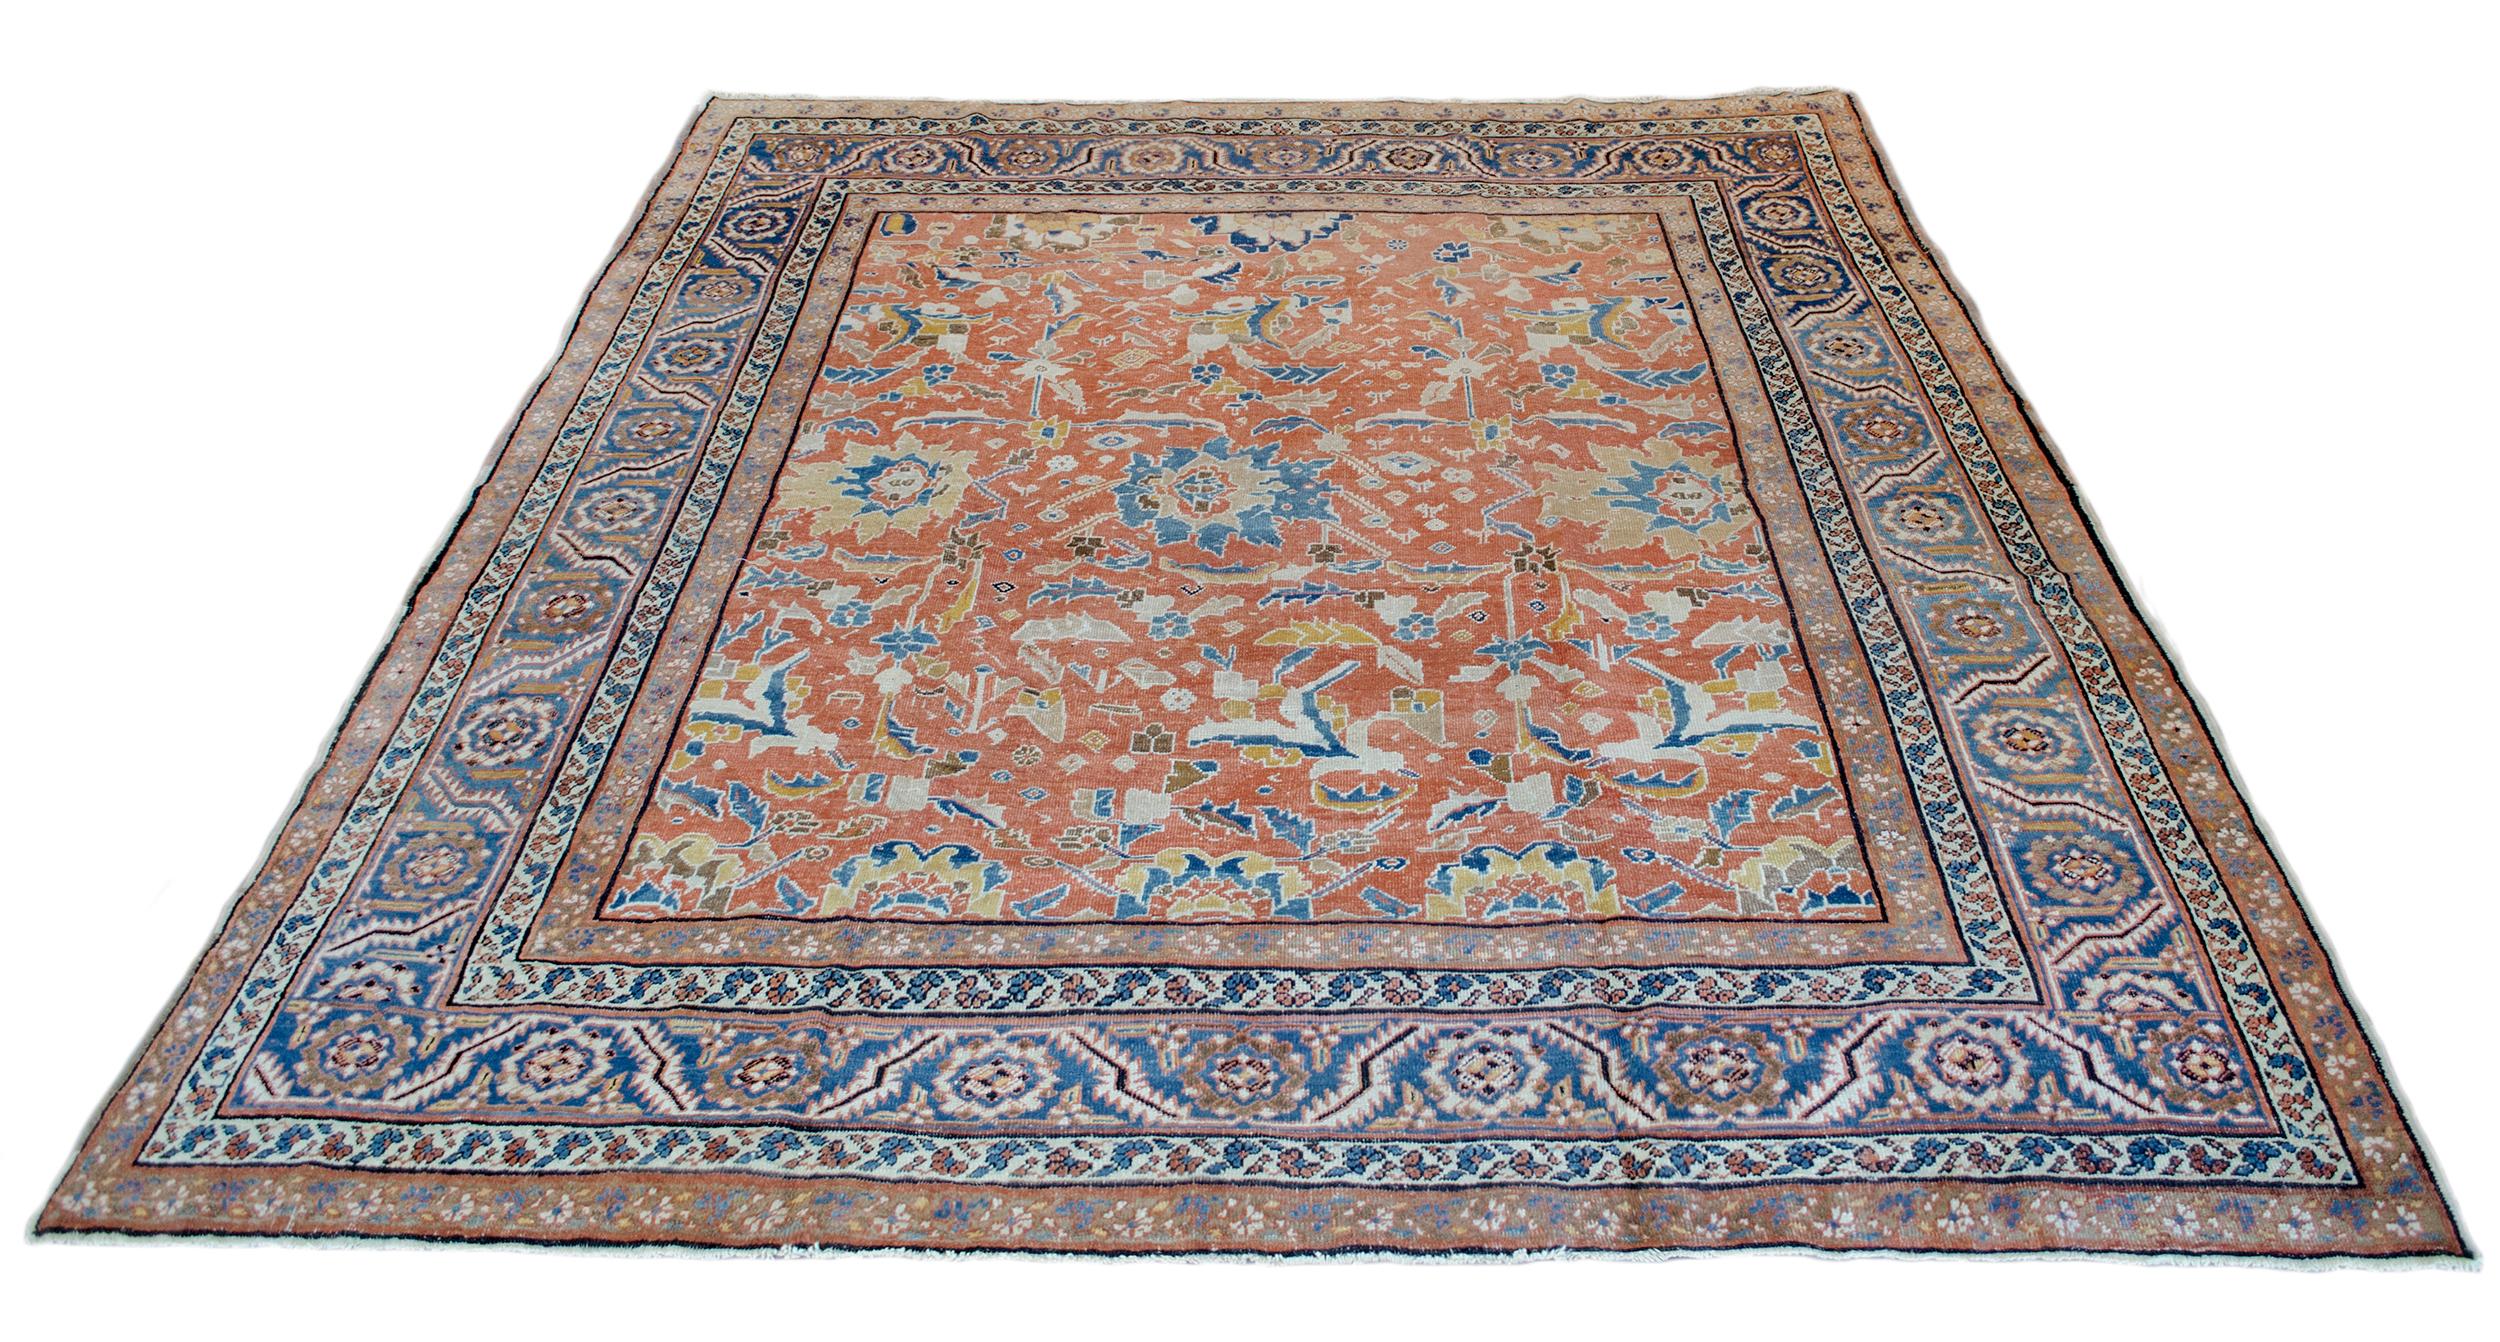 This traditional handwoven Persian Bakhshaish rug has a shaded brick-red field with an overall design of bold polychrome palmettes and tendrils, in a medium-blue border of lush serrated leaves and flowerheads between refined mole-brown and ivory